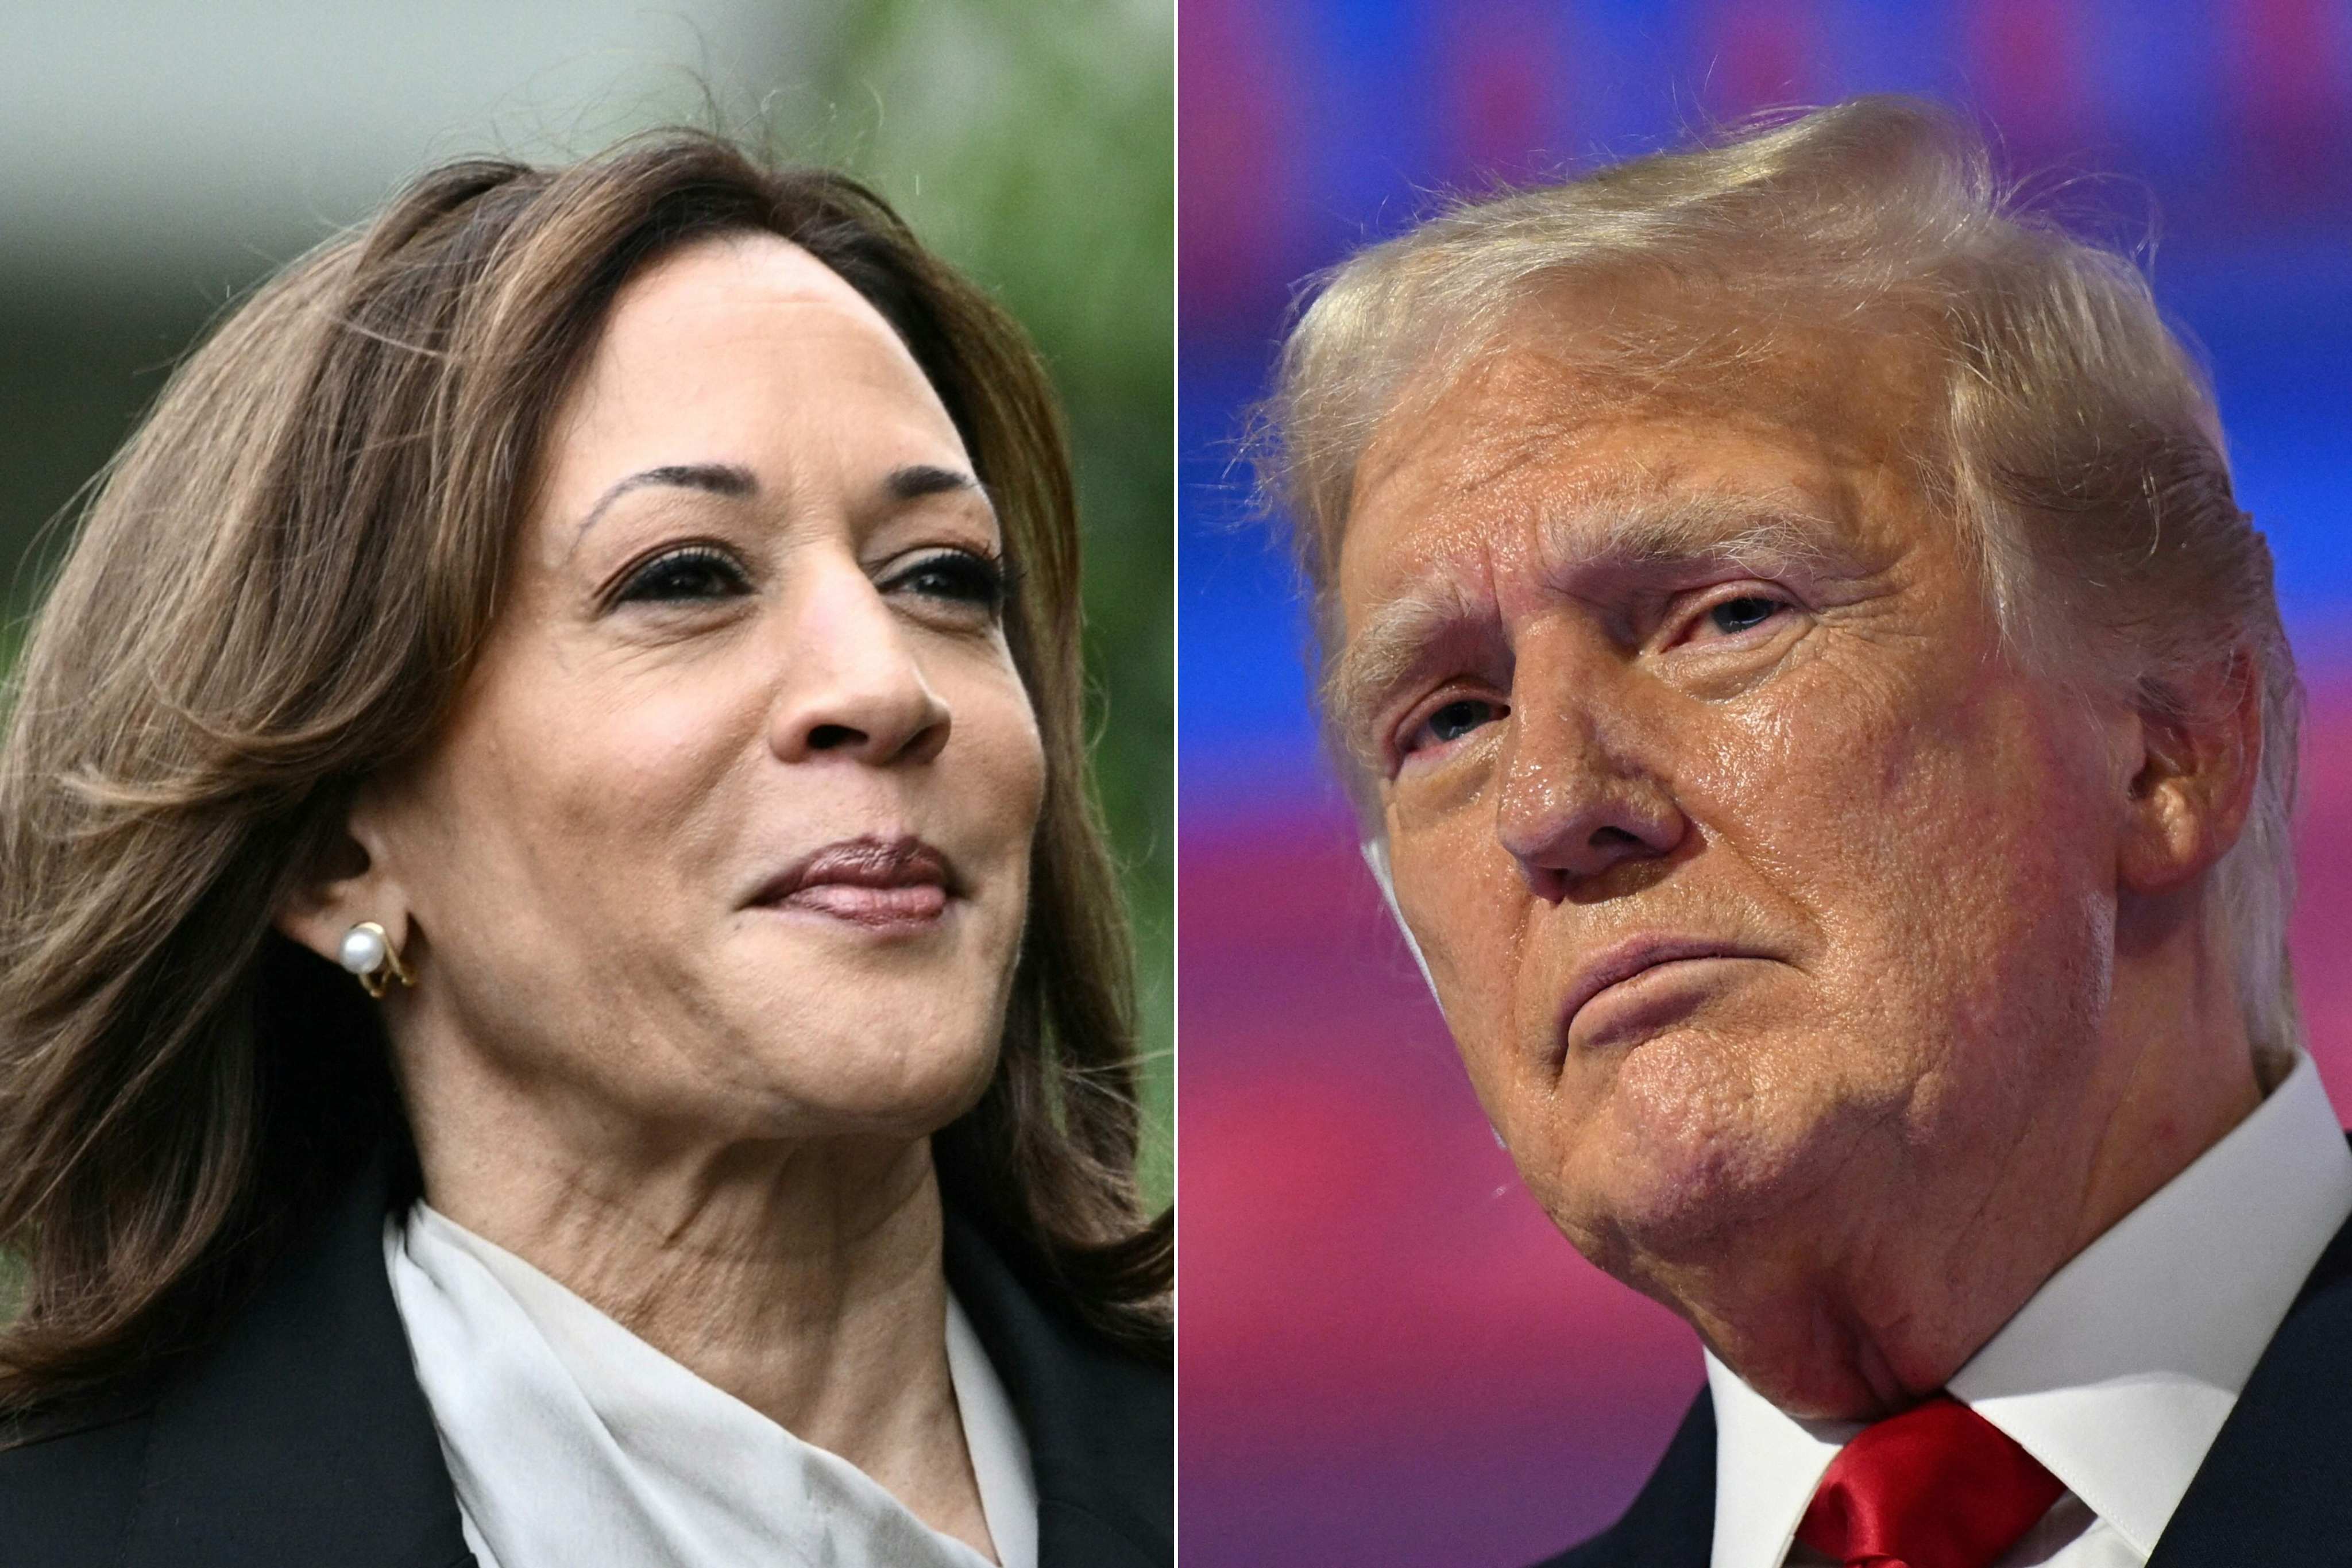 The elevation of Vice-President Kamala Harris as the Democratic front-runner has injected uncertainty into the US election for world leaders already grappling with the implications of Trump’s potential return to the presidency. Photo: AFP